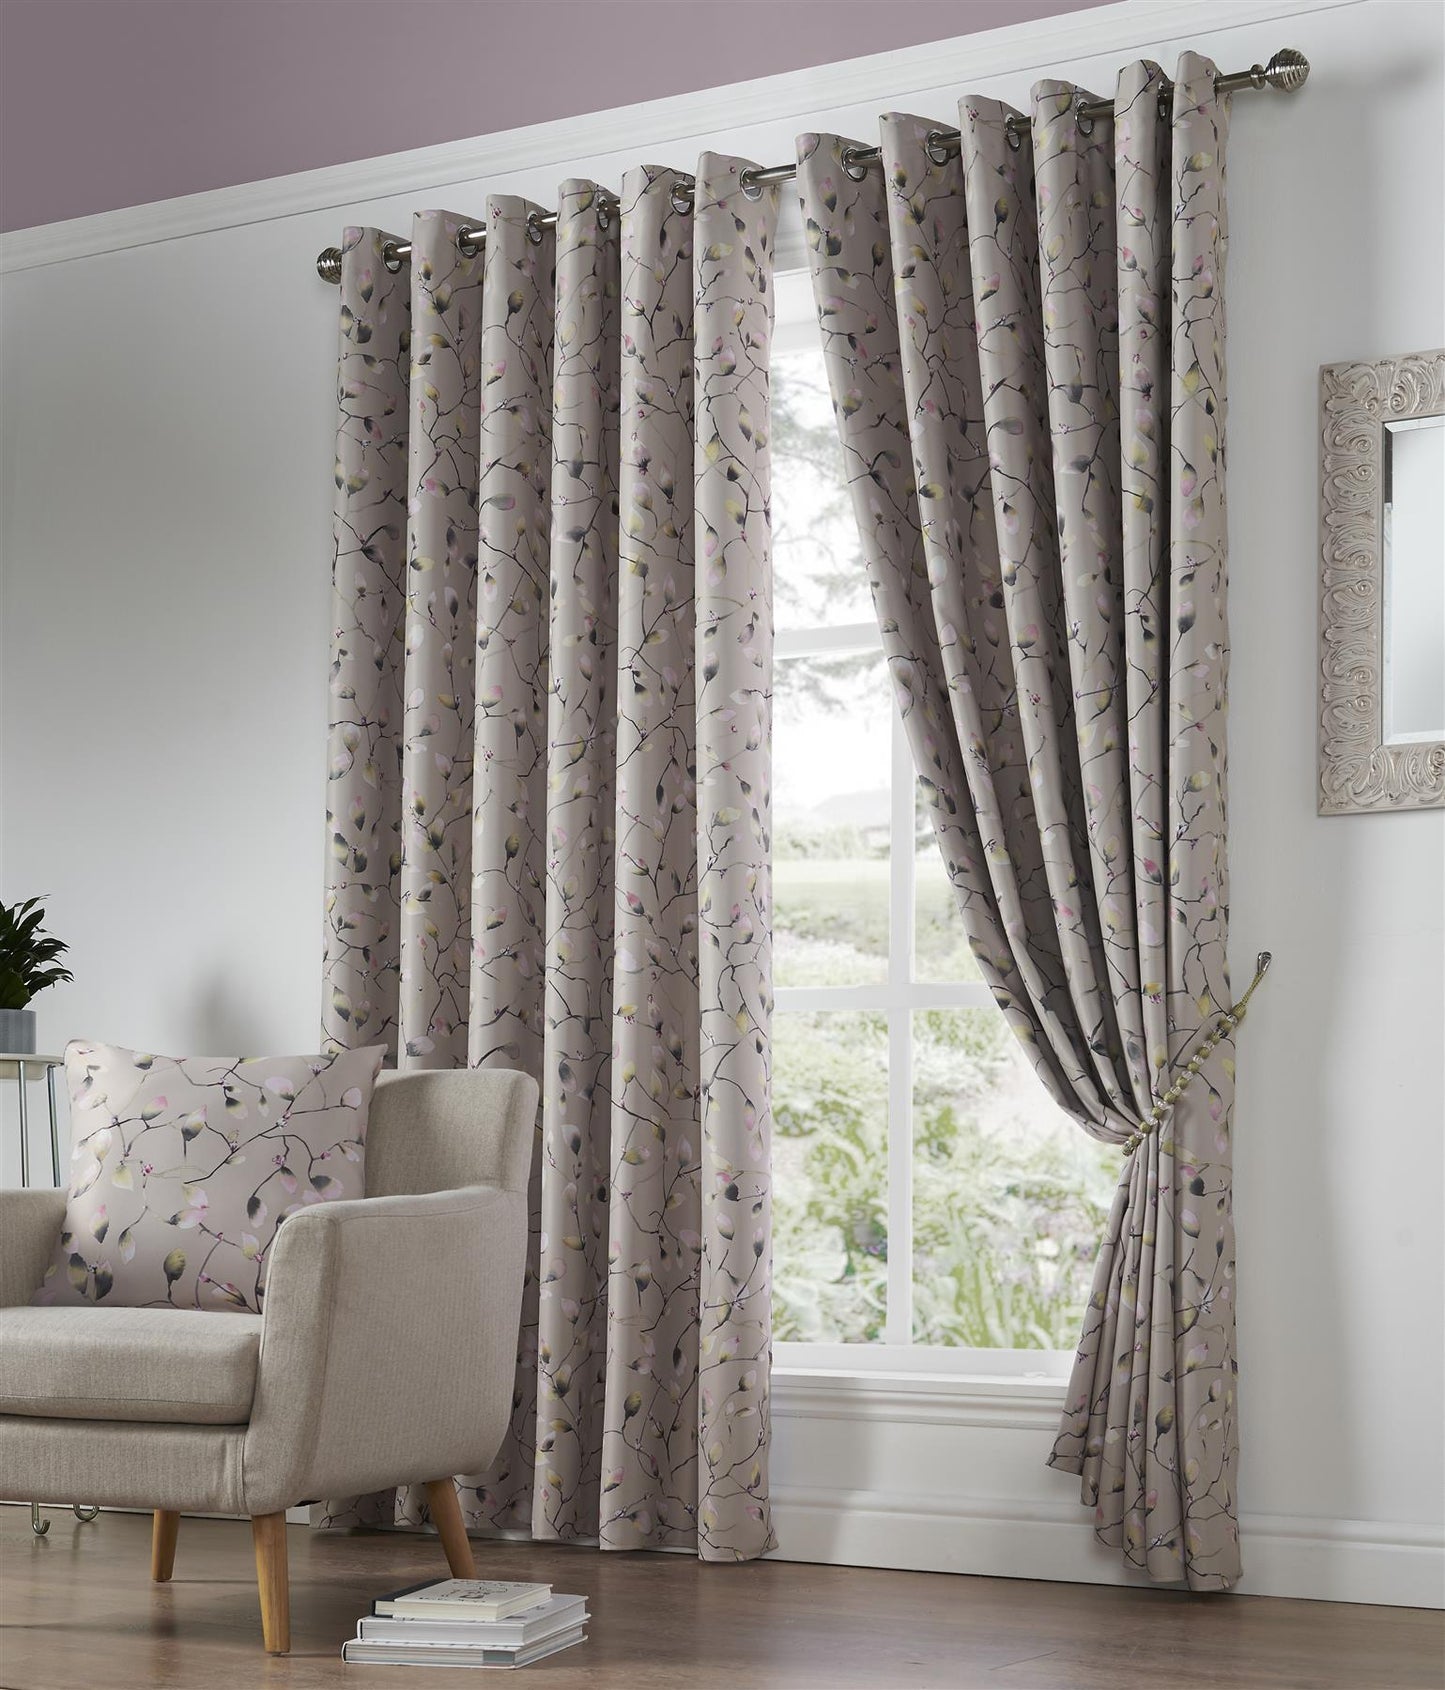 Pink Blossom Blackout Thermal Eyelet Curtains - Pair